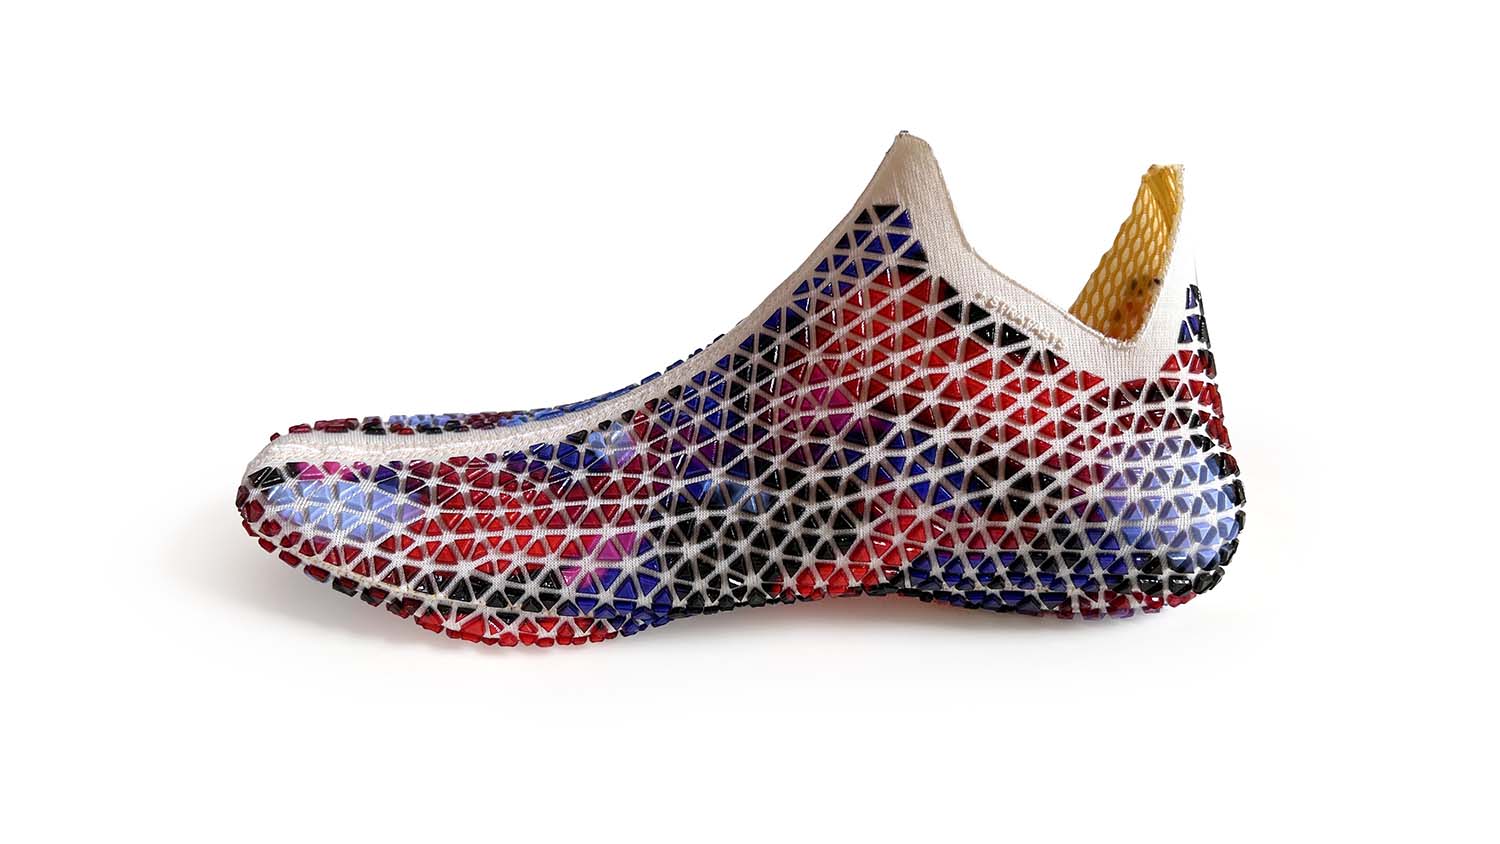 Reflection Collection Assa Ashuach’s 3D printed Evolve shoe contains a personalised midsole sensor that studies its wearer while recording their movement data